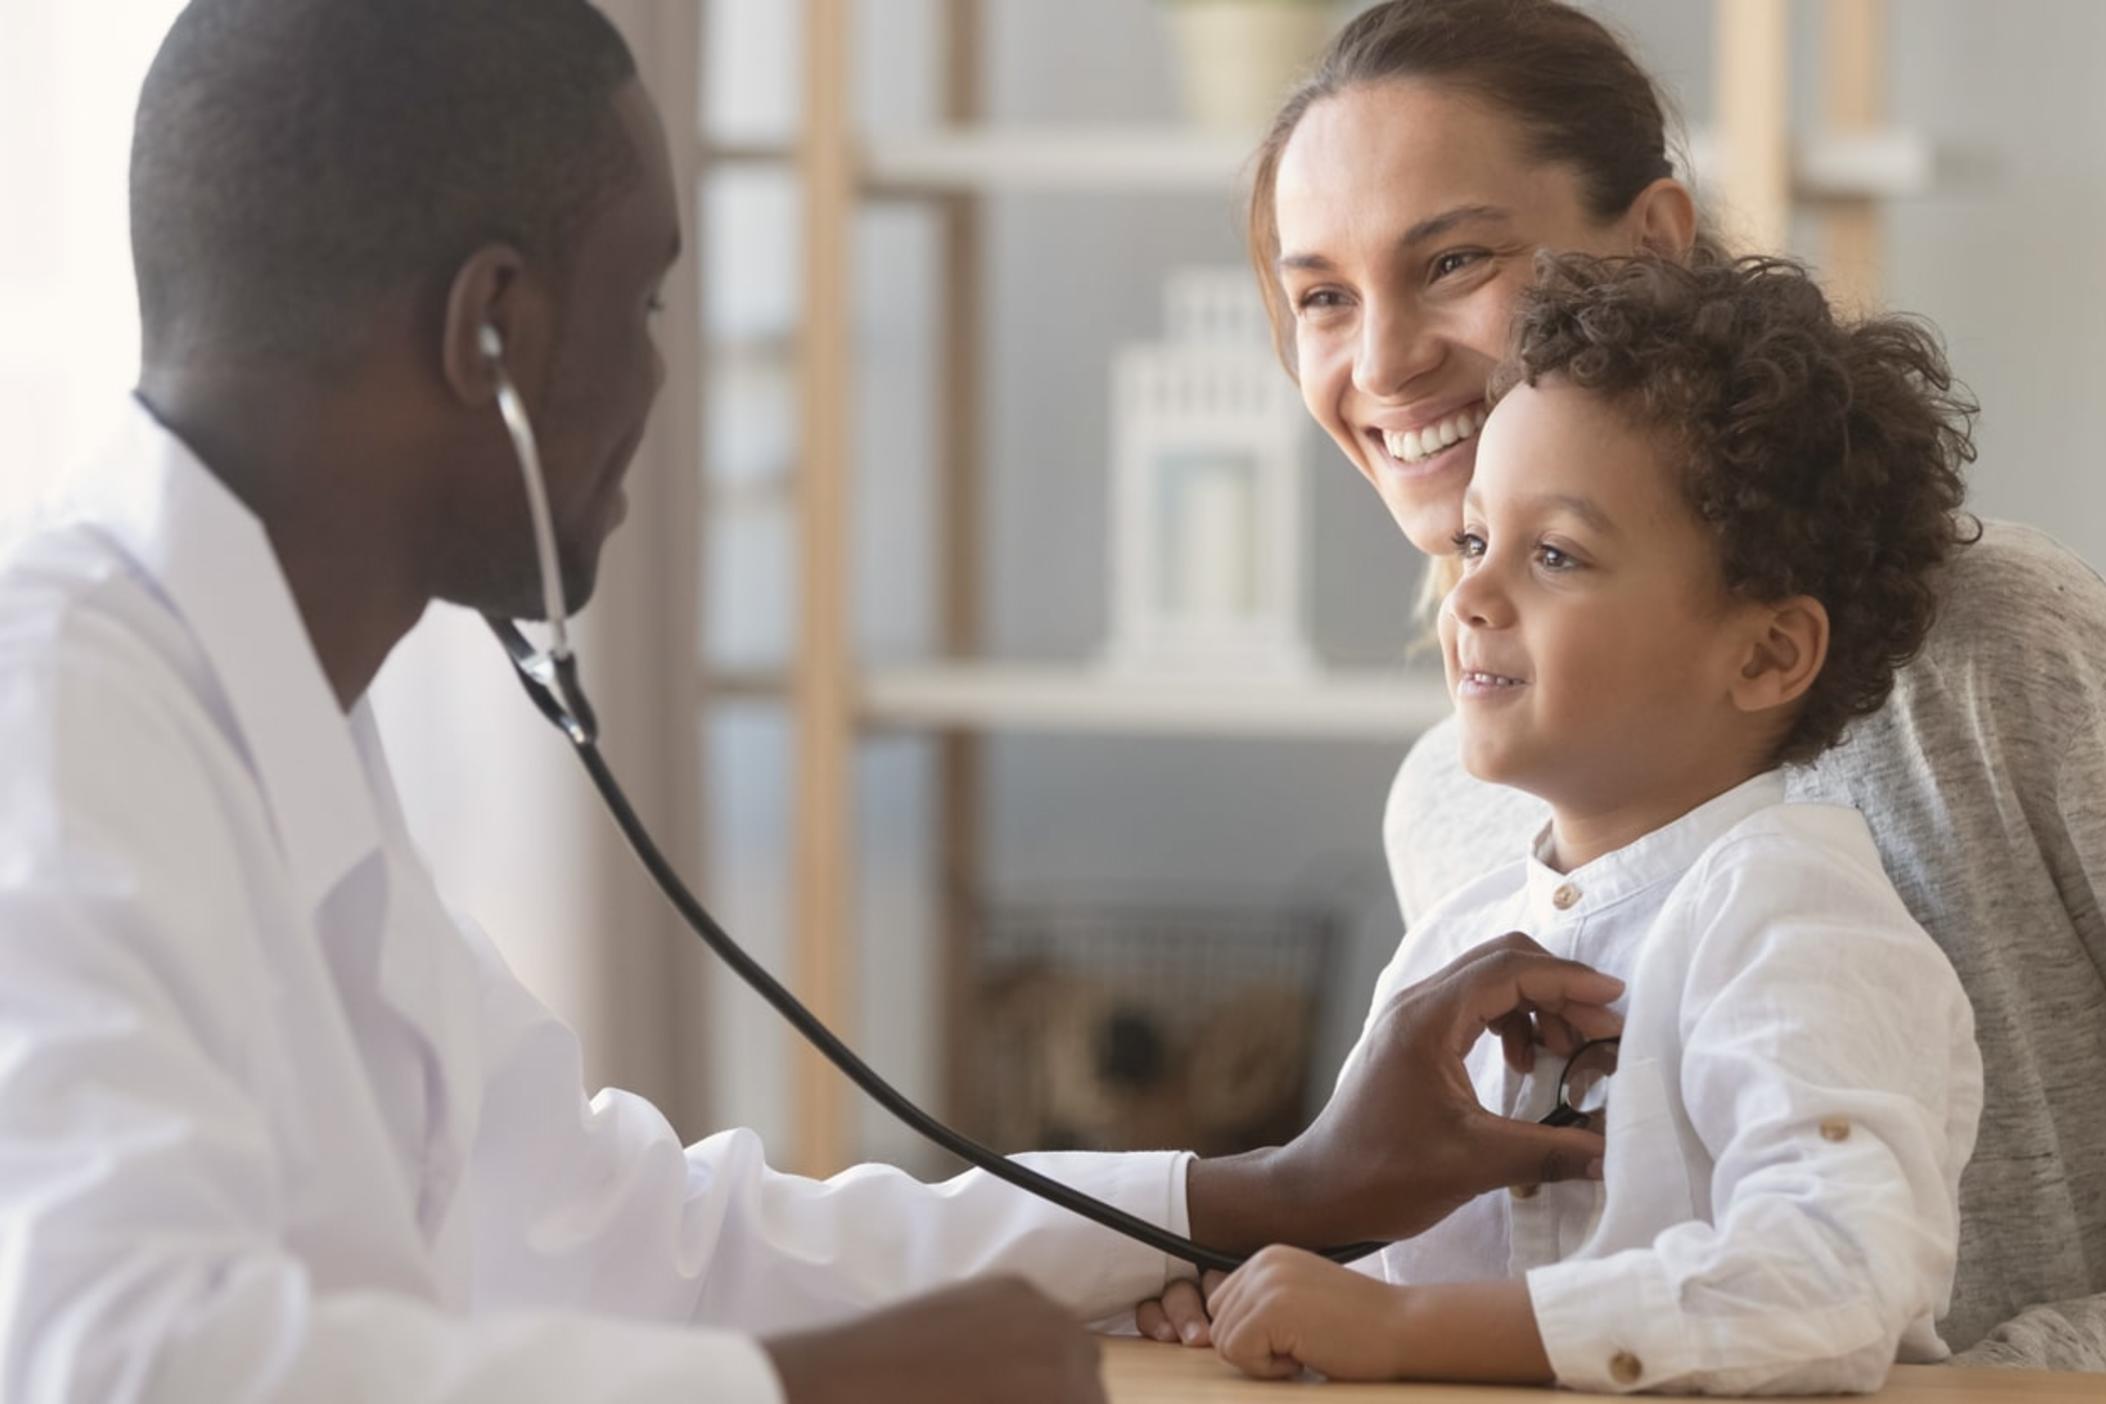 A doctor using a stethoscope to check a young boy's heartbeat.